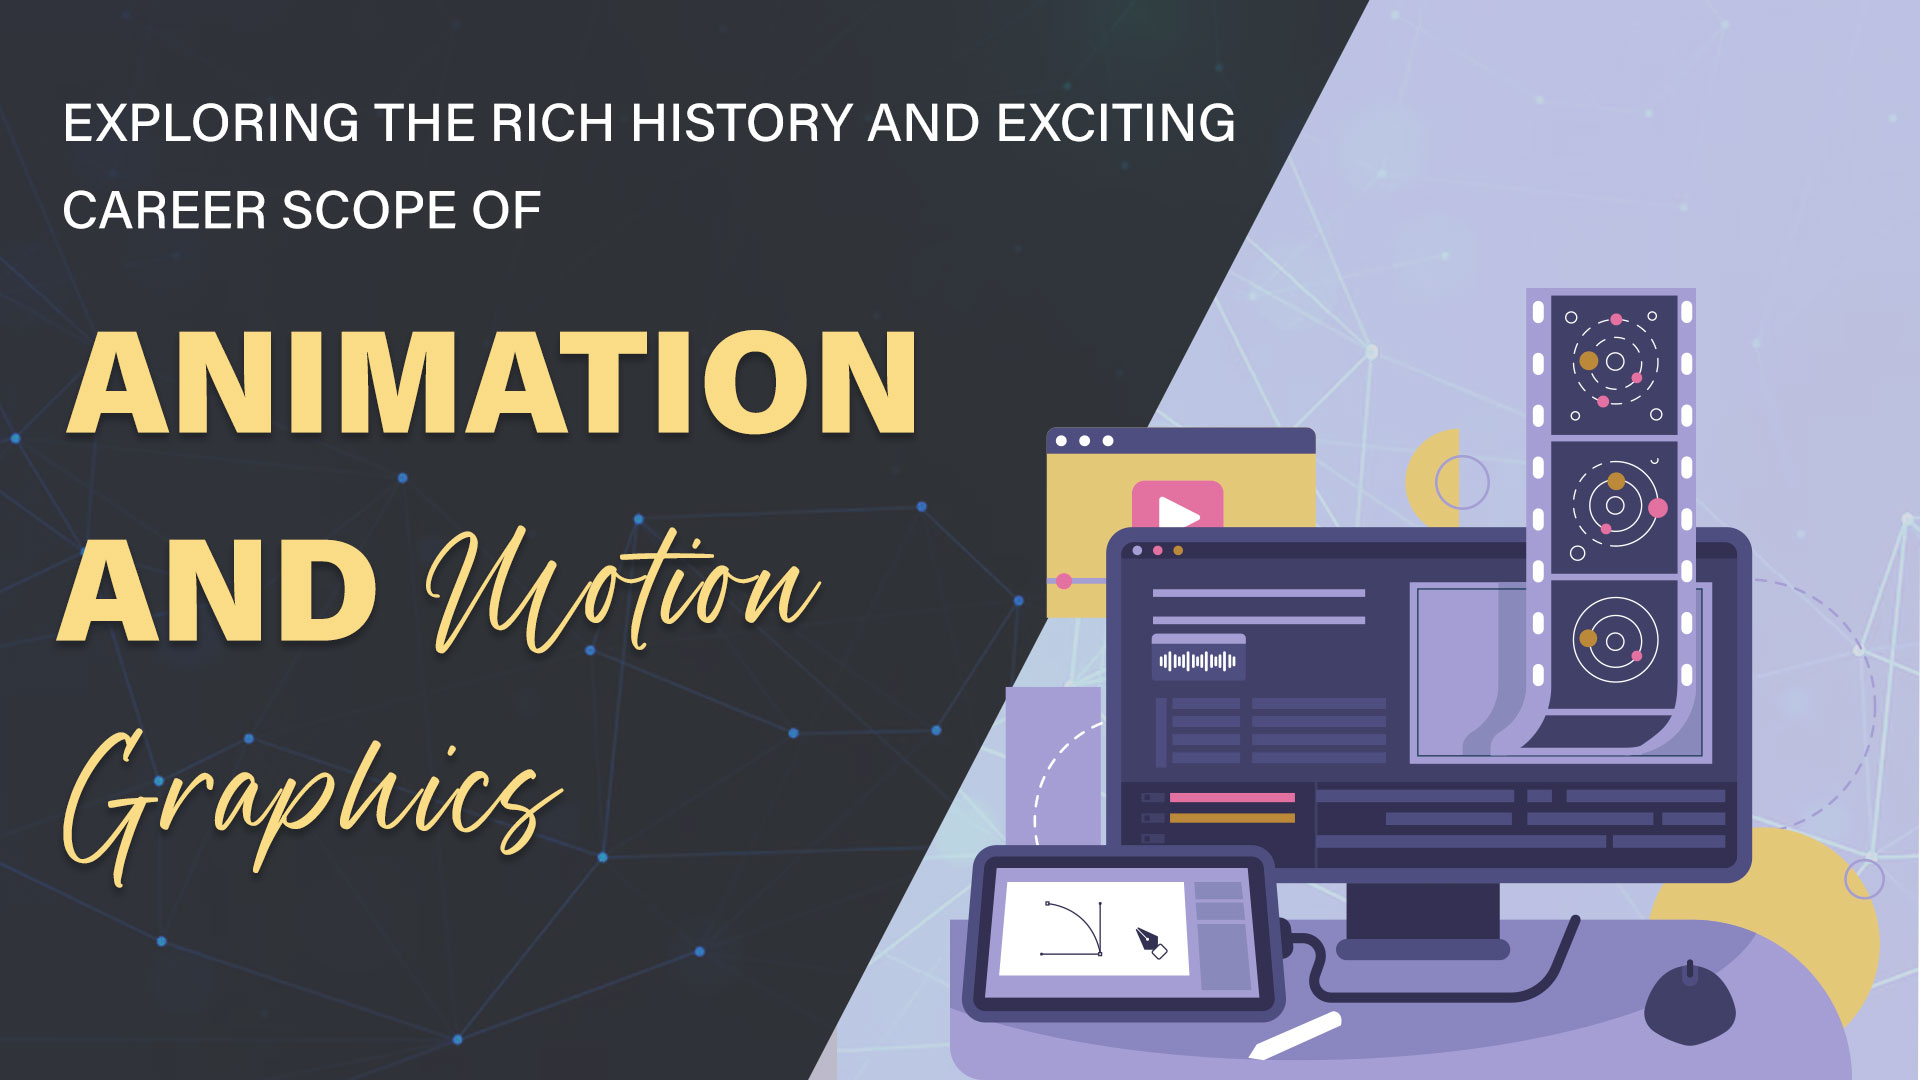 Exploring the Rich History and Exciting Career Scope of Animation and Motion Graphics